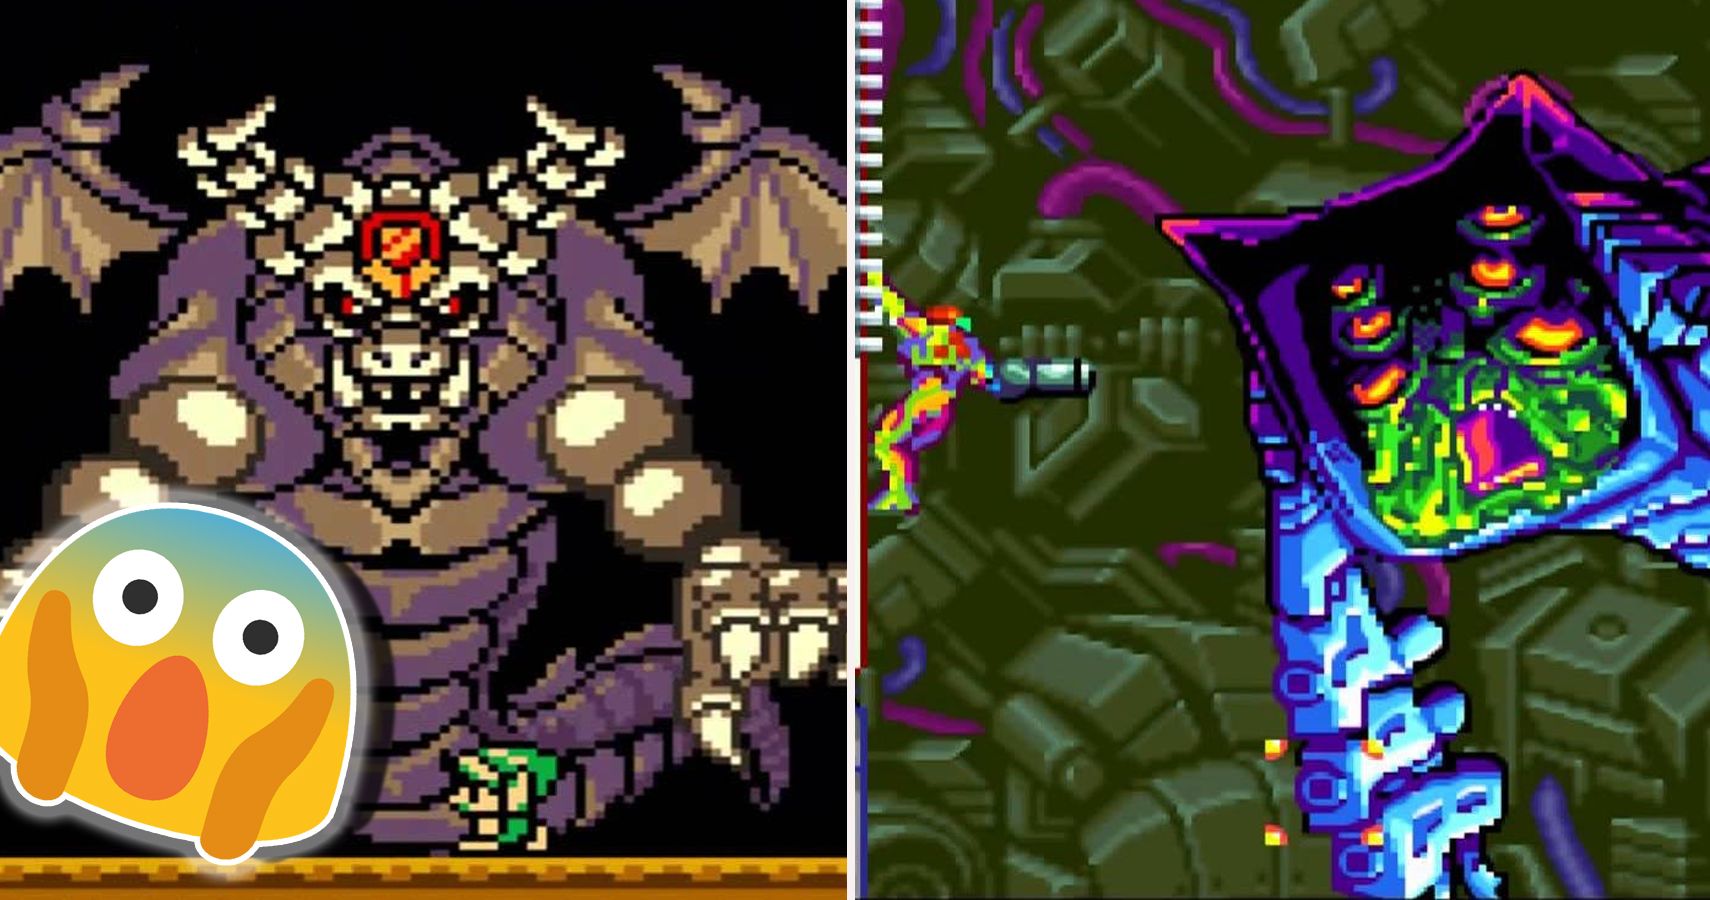 20 Video Game Bosses You Must Defeat Before You Die – Page 2